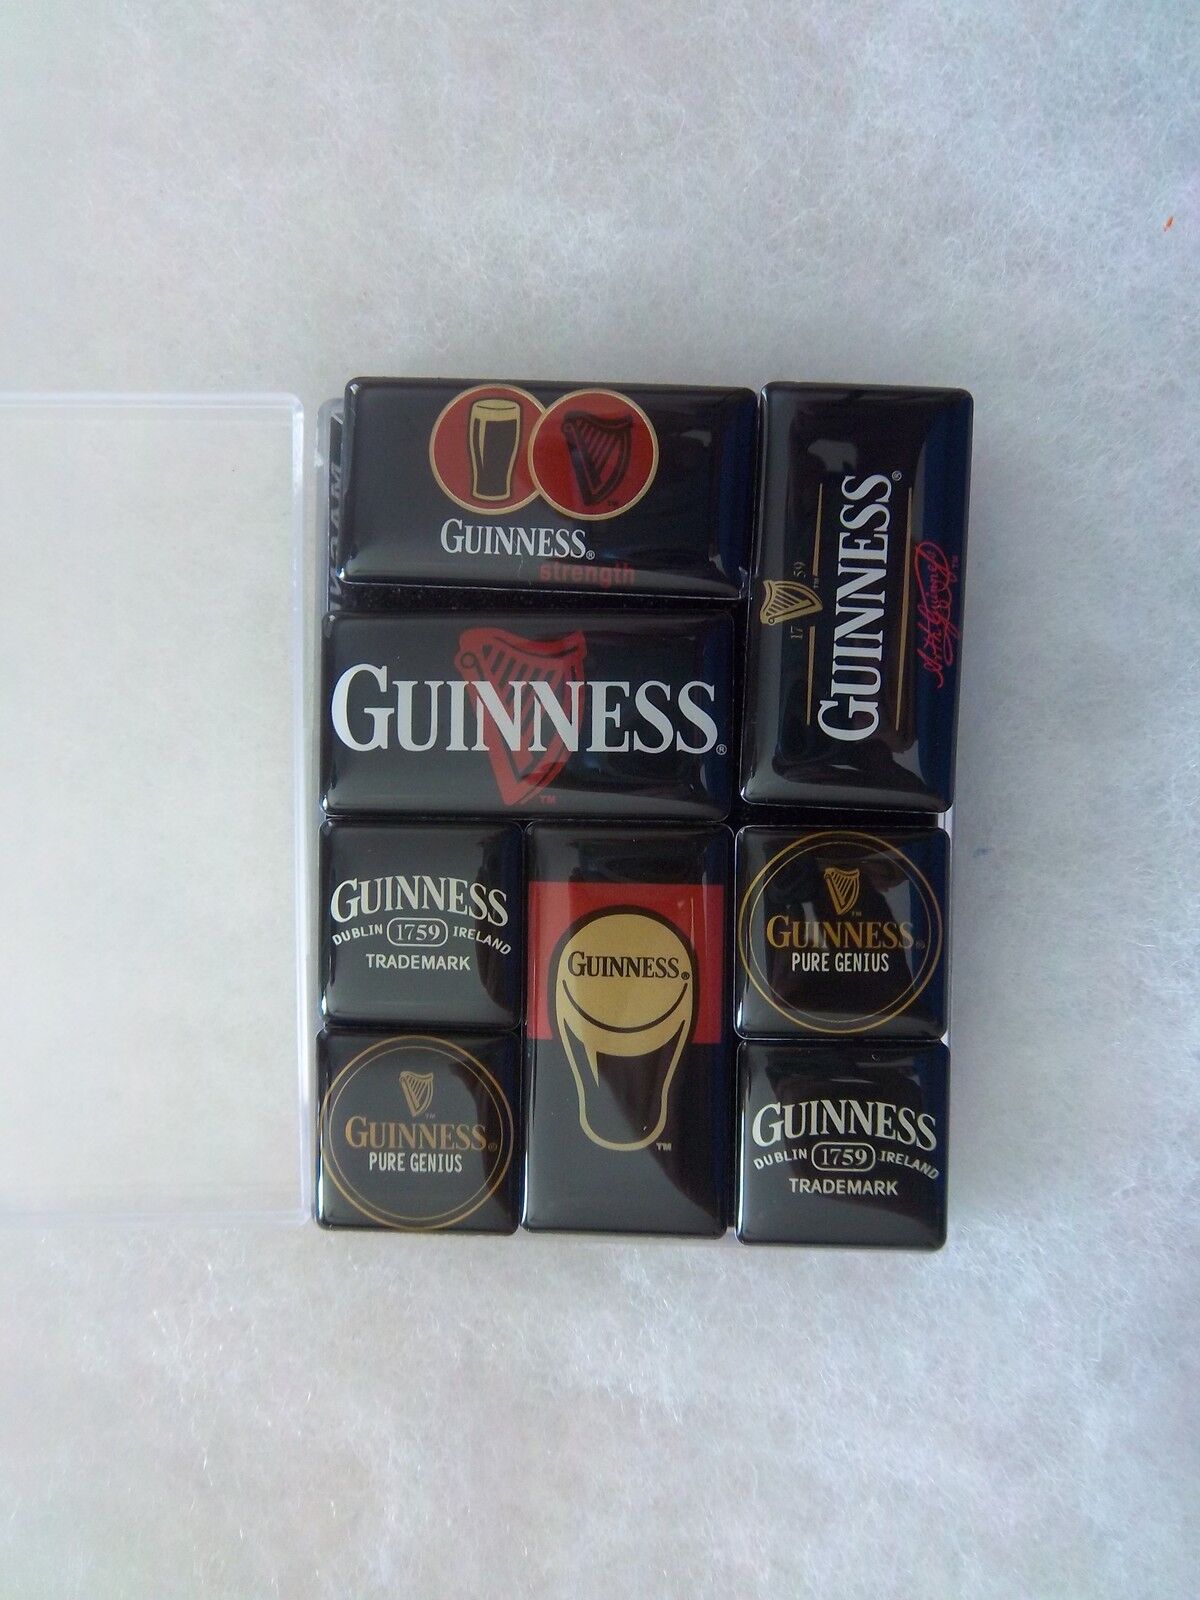 BRAND-NEW GUINNESS BEER SET OF EIGHT MAGNETS 